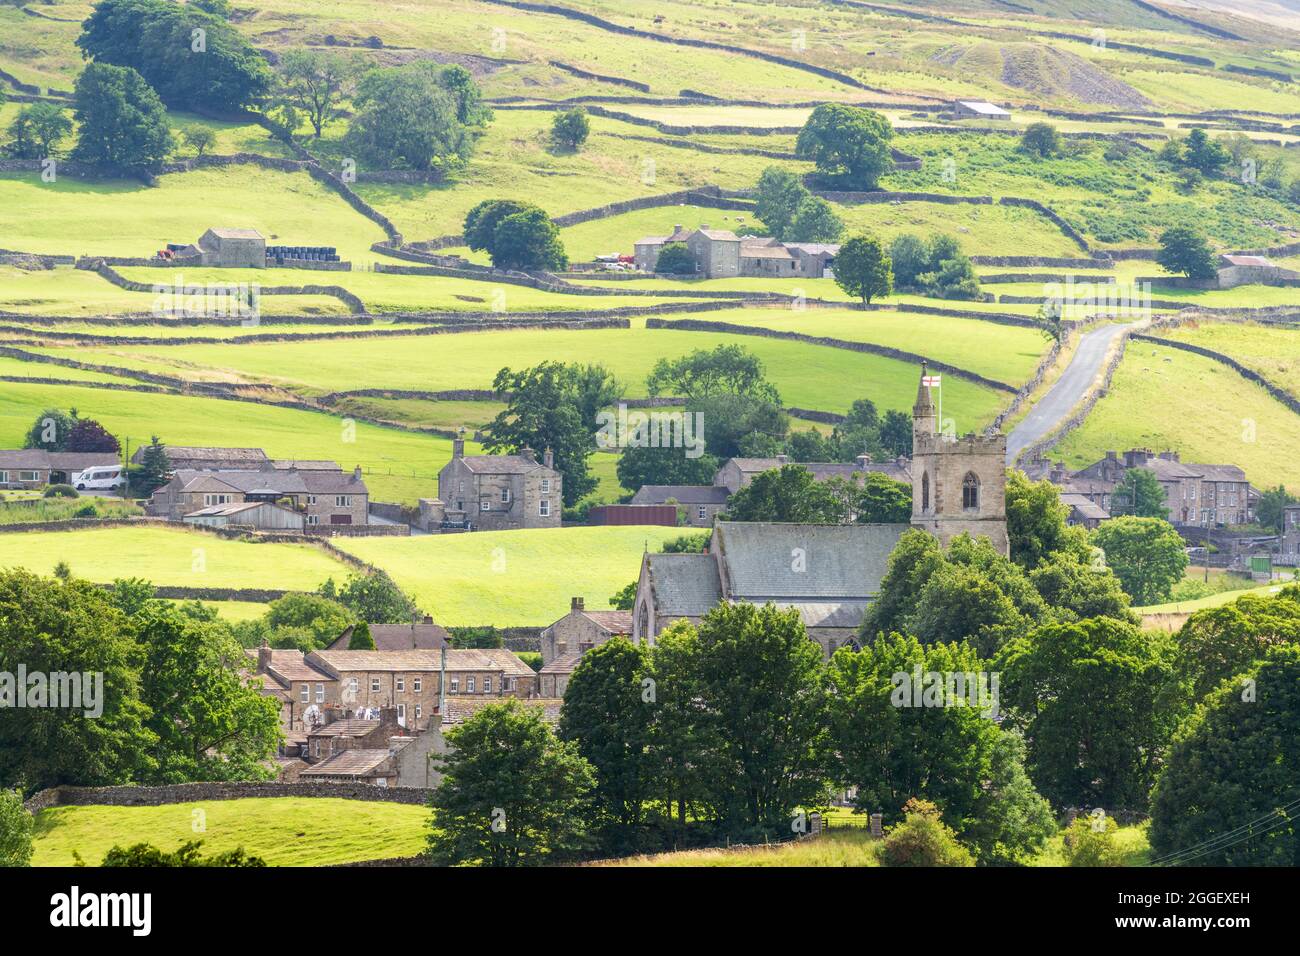 Hawes città mercato in Upper Wensleydale, lo Yorkshire Dales, Inghilterra. Foto Stock